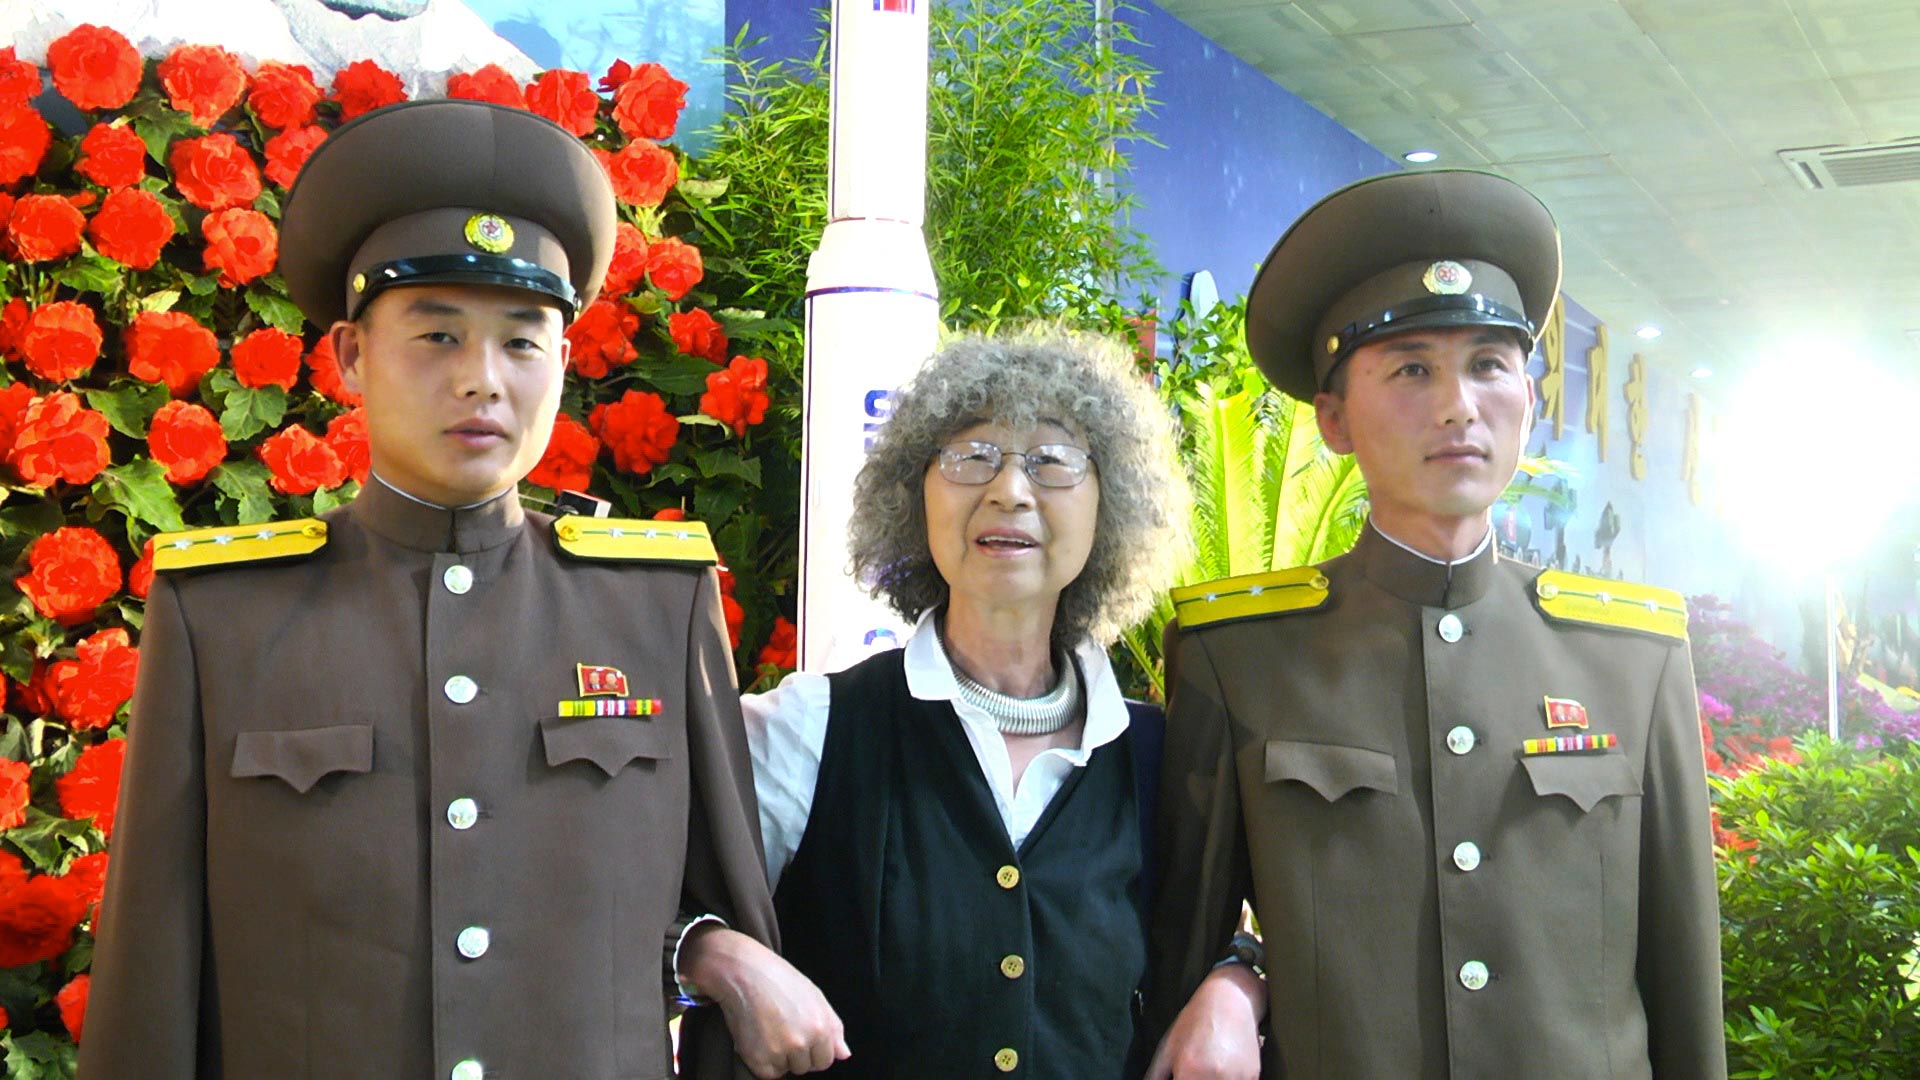 Korean military men arm in arm with elderly Korean woman in front of flowers and model rocket